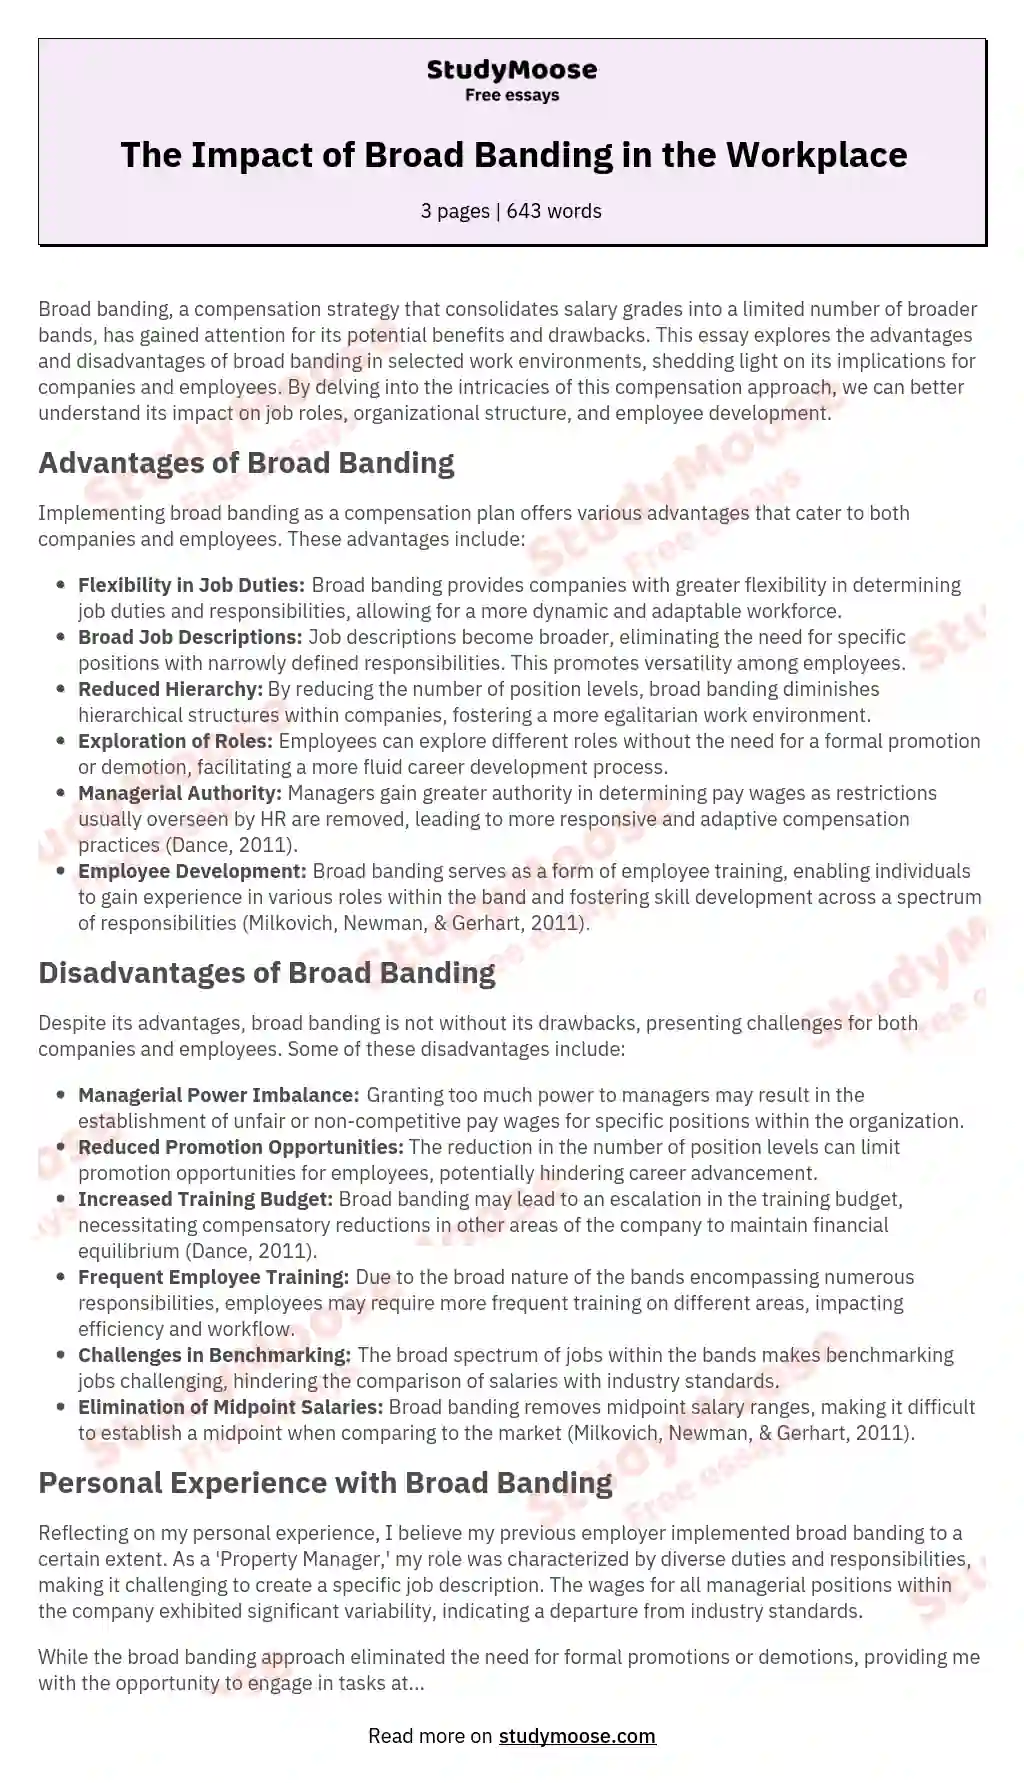 The Impact of Broad Banding in the Workplace essay